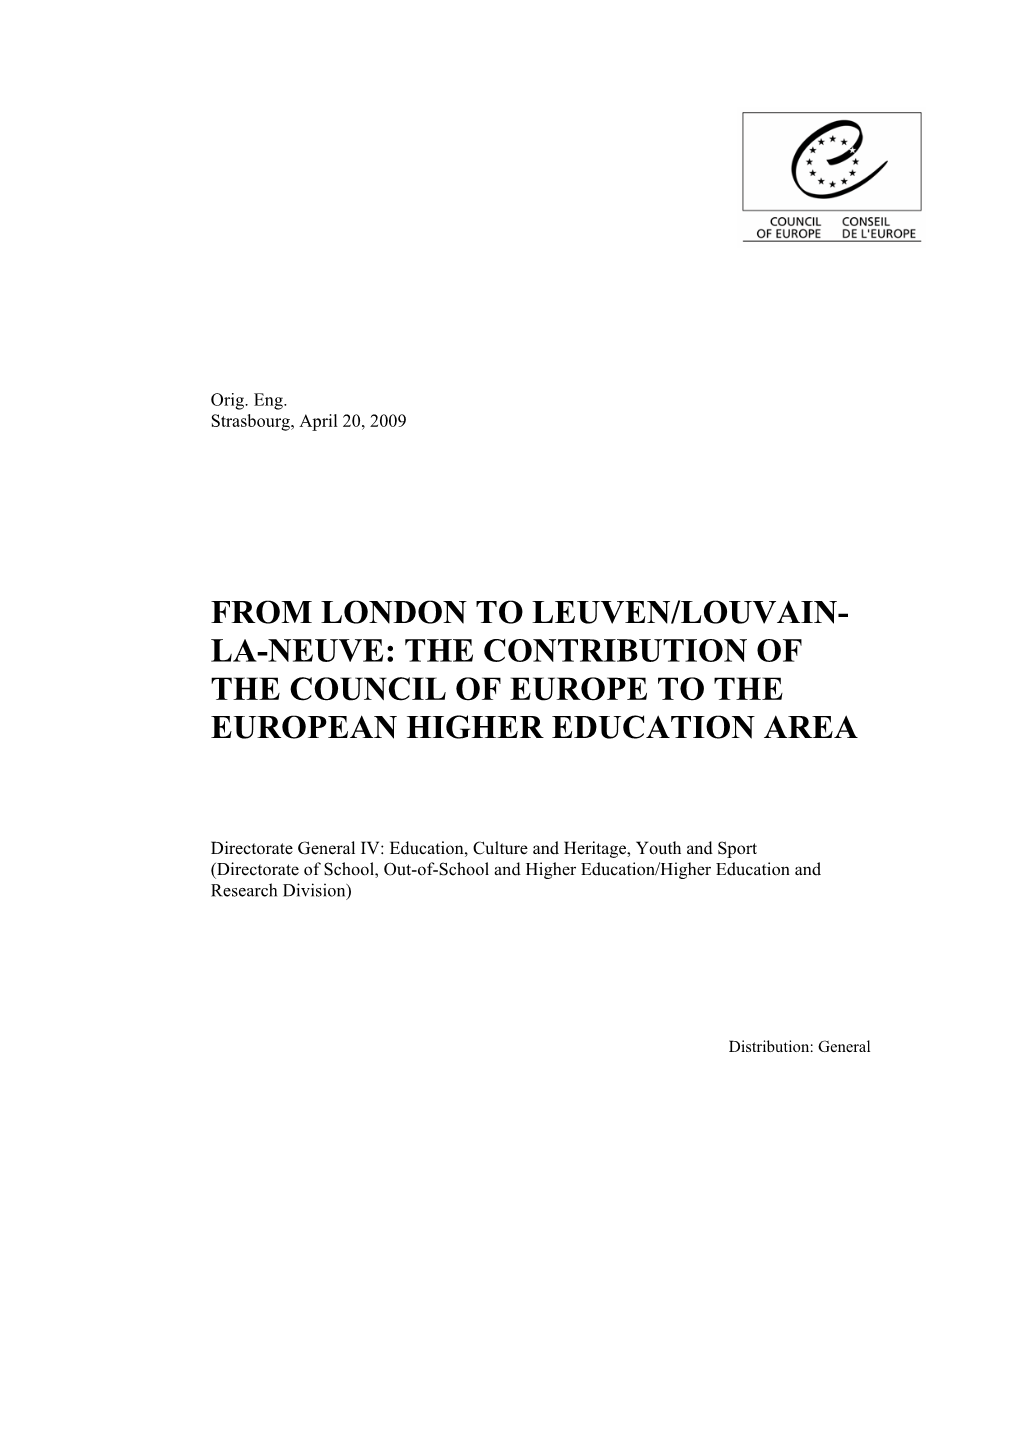 La-Neuve: the Contribution of the Council of Europe to the European Higher Education Area